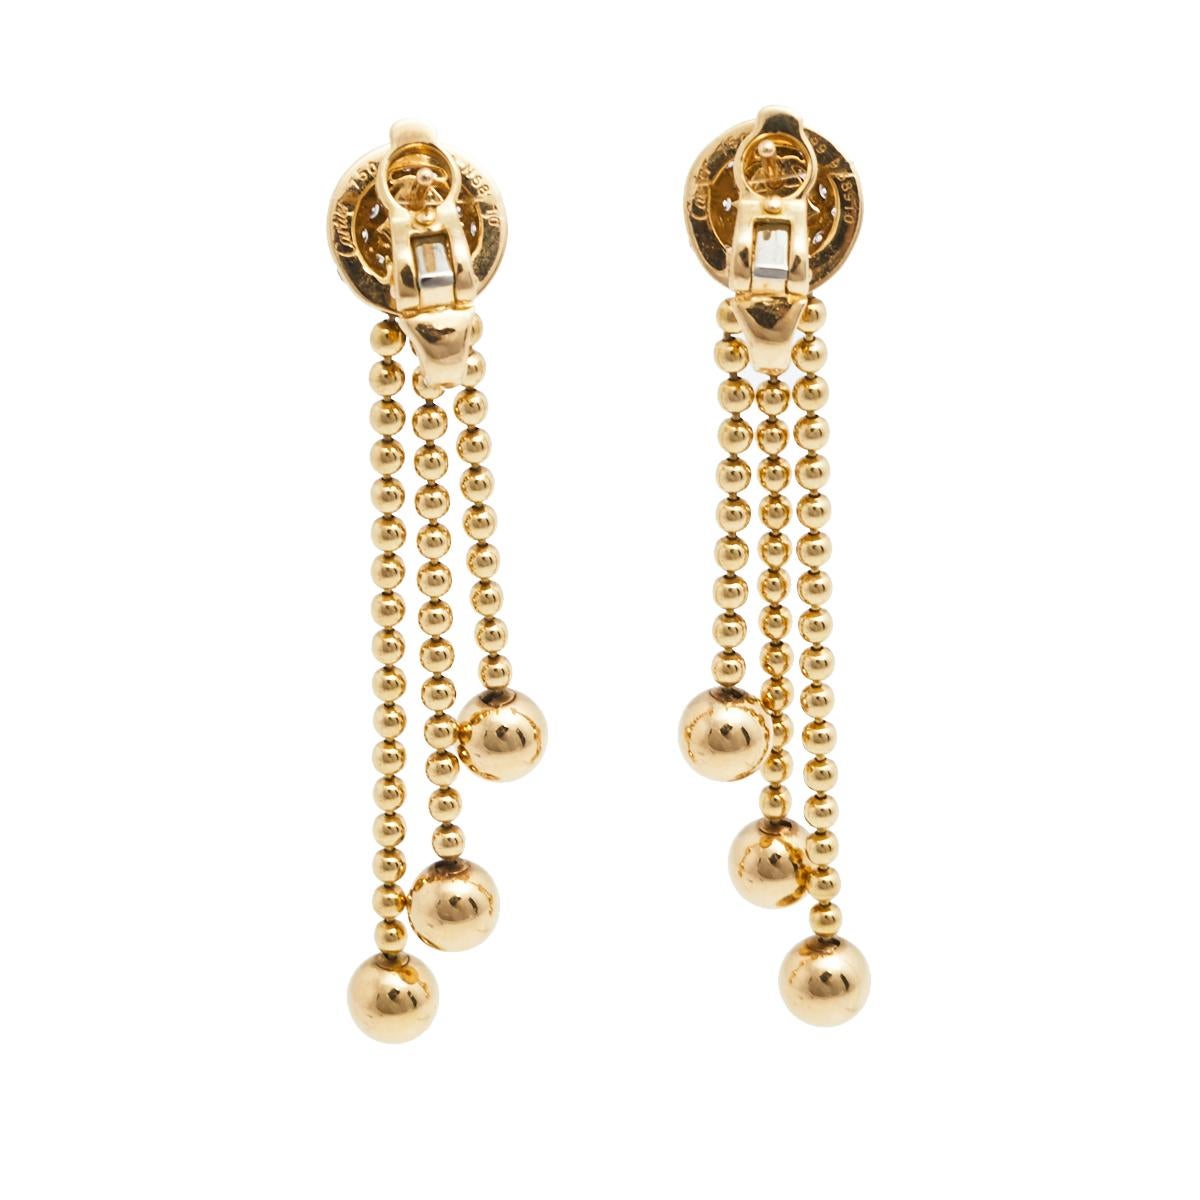 Let's bask and dance in sparkles with Cartier! These incredibly exquisite earrings are made of 18k yellow gold and bring diamond-embellished studs and dangling beaded chains that move with you. At once delicate and bold, these Cartier Draperie